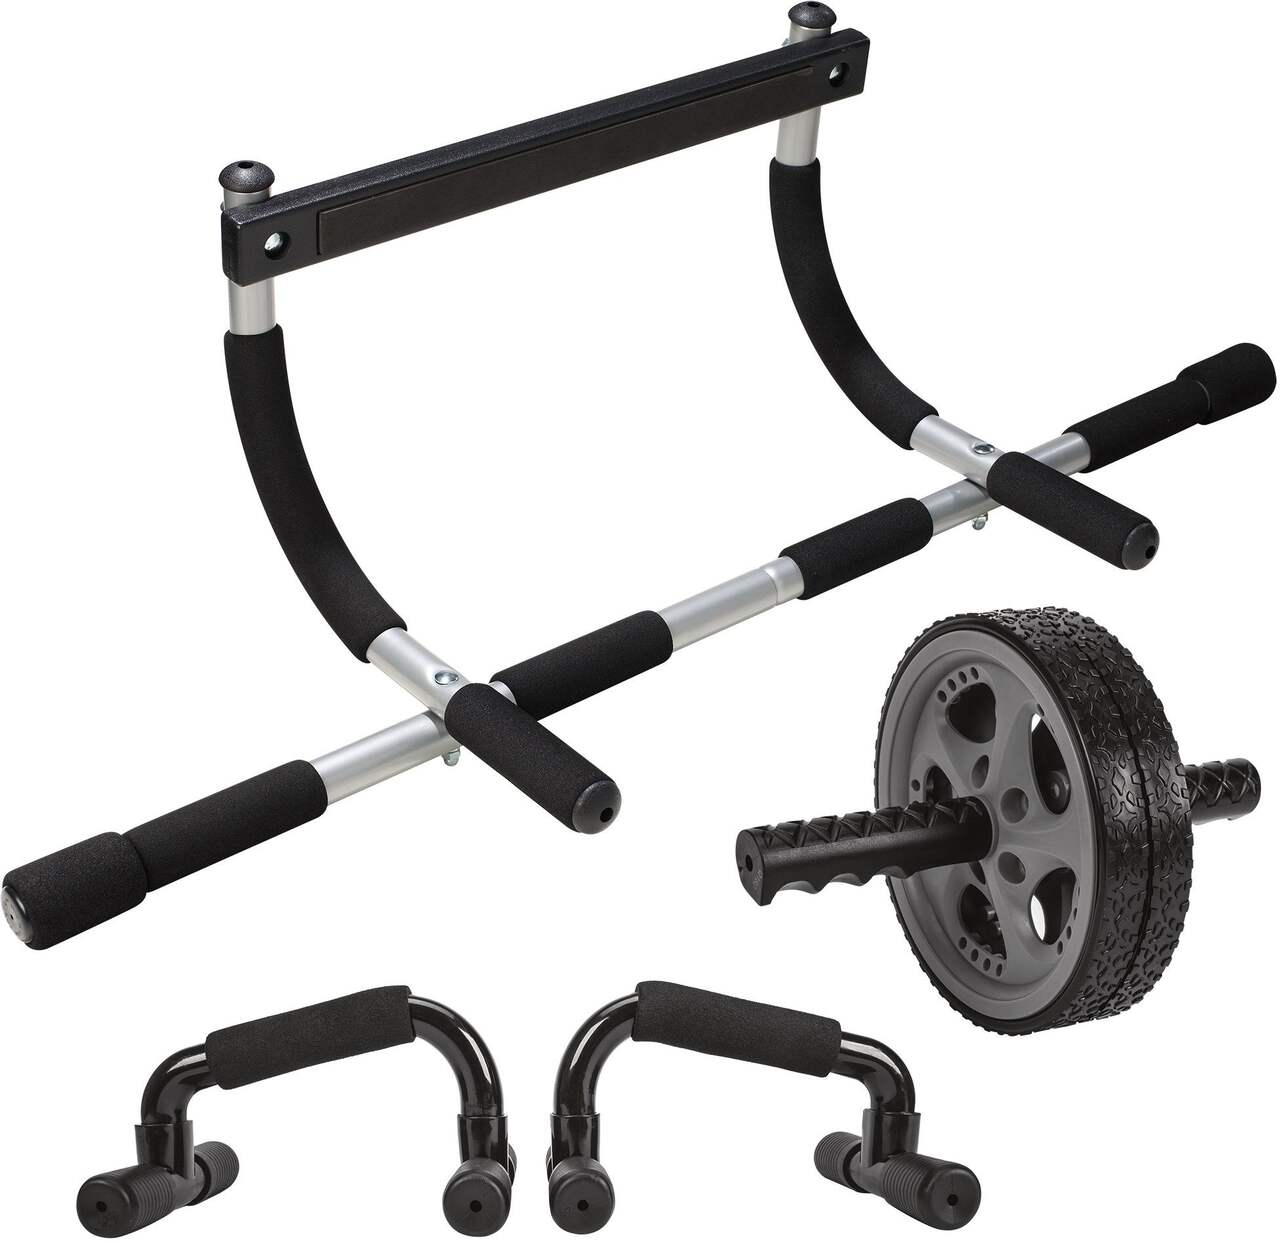 https://media-www.canadiantire.ca/product/playing/exercise/exercise-accessories/1840632/econofitness-ultimate-workout-kit-7455c110-ebb0-44ba-a52f-ff1807f1bfd6-jpgrendition.jpg?imdensity=1&imwidth=640&impolicy=mZoom